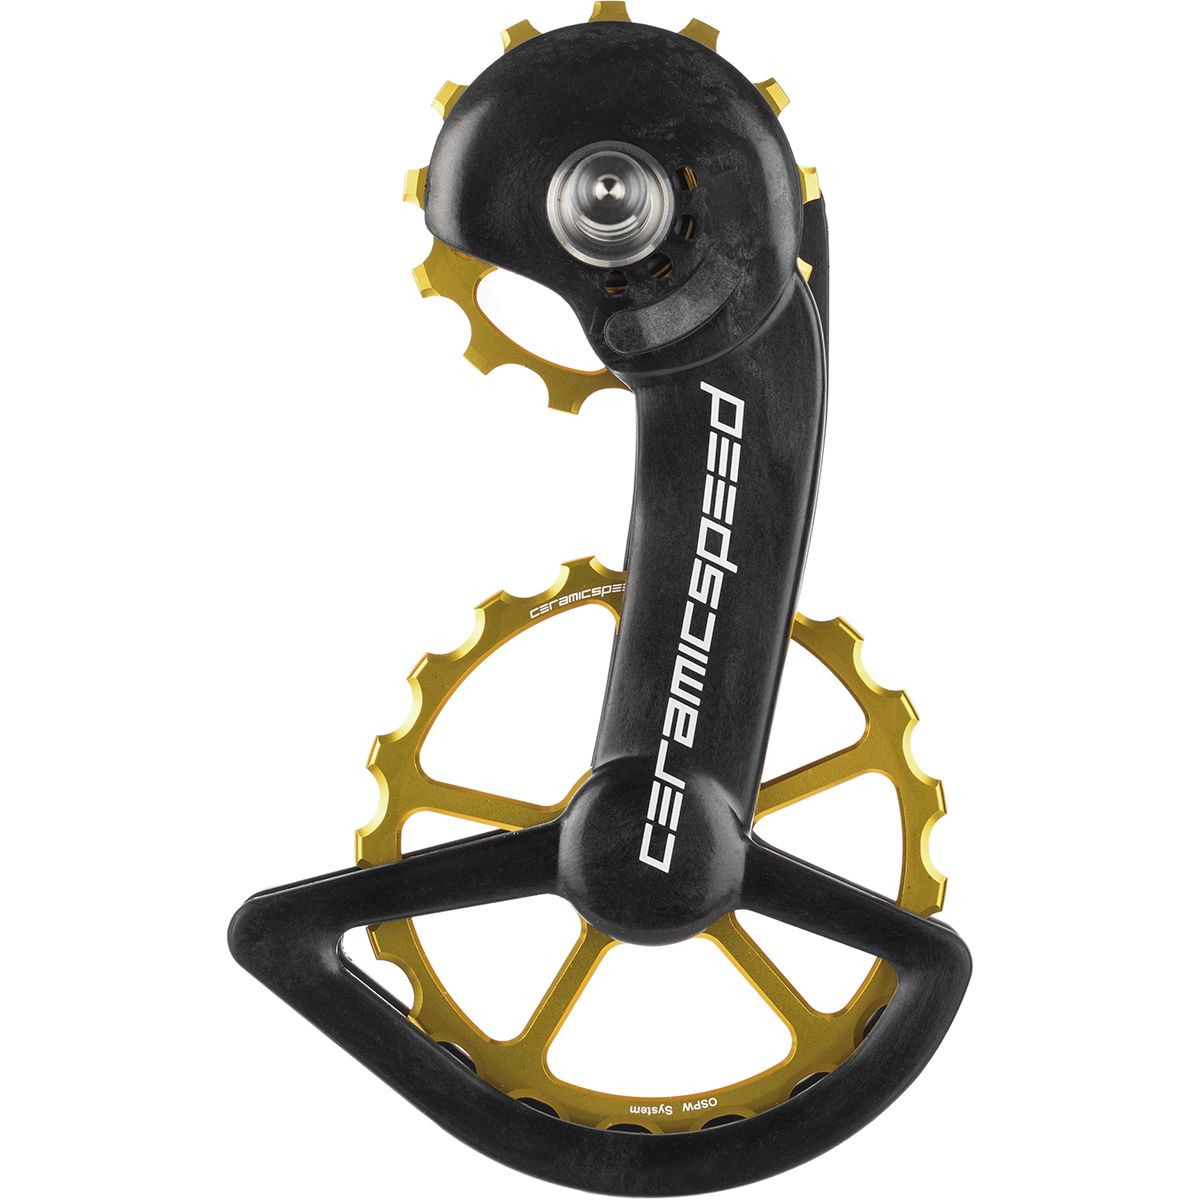 CeramicSpeed Limited Edition Oversized Pulley Wheel System